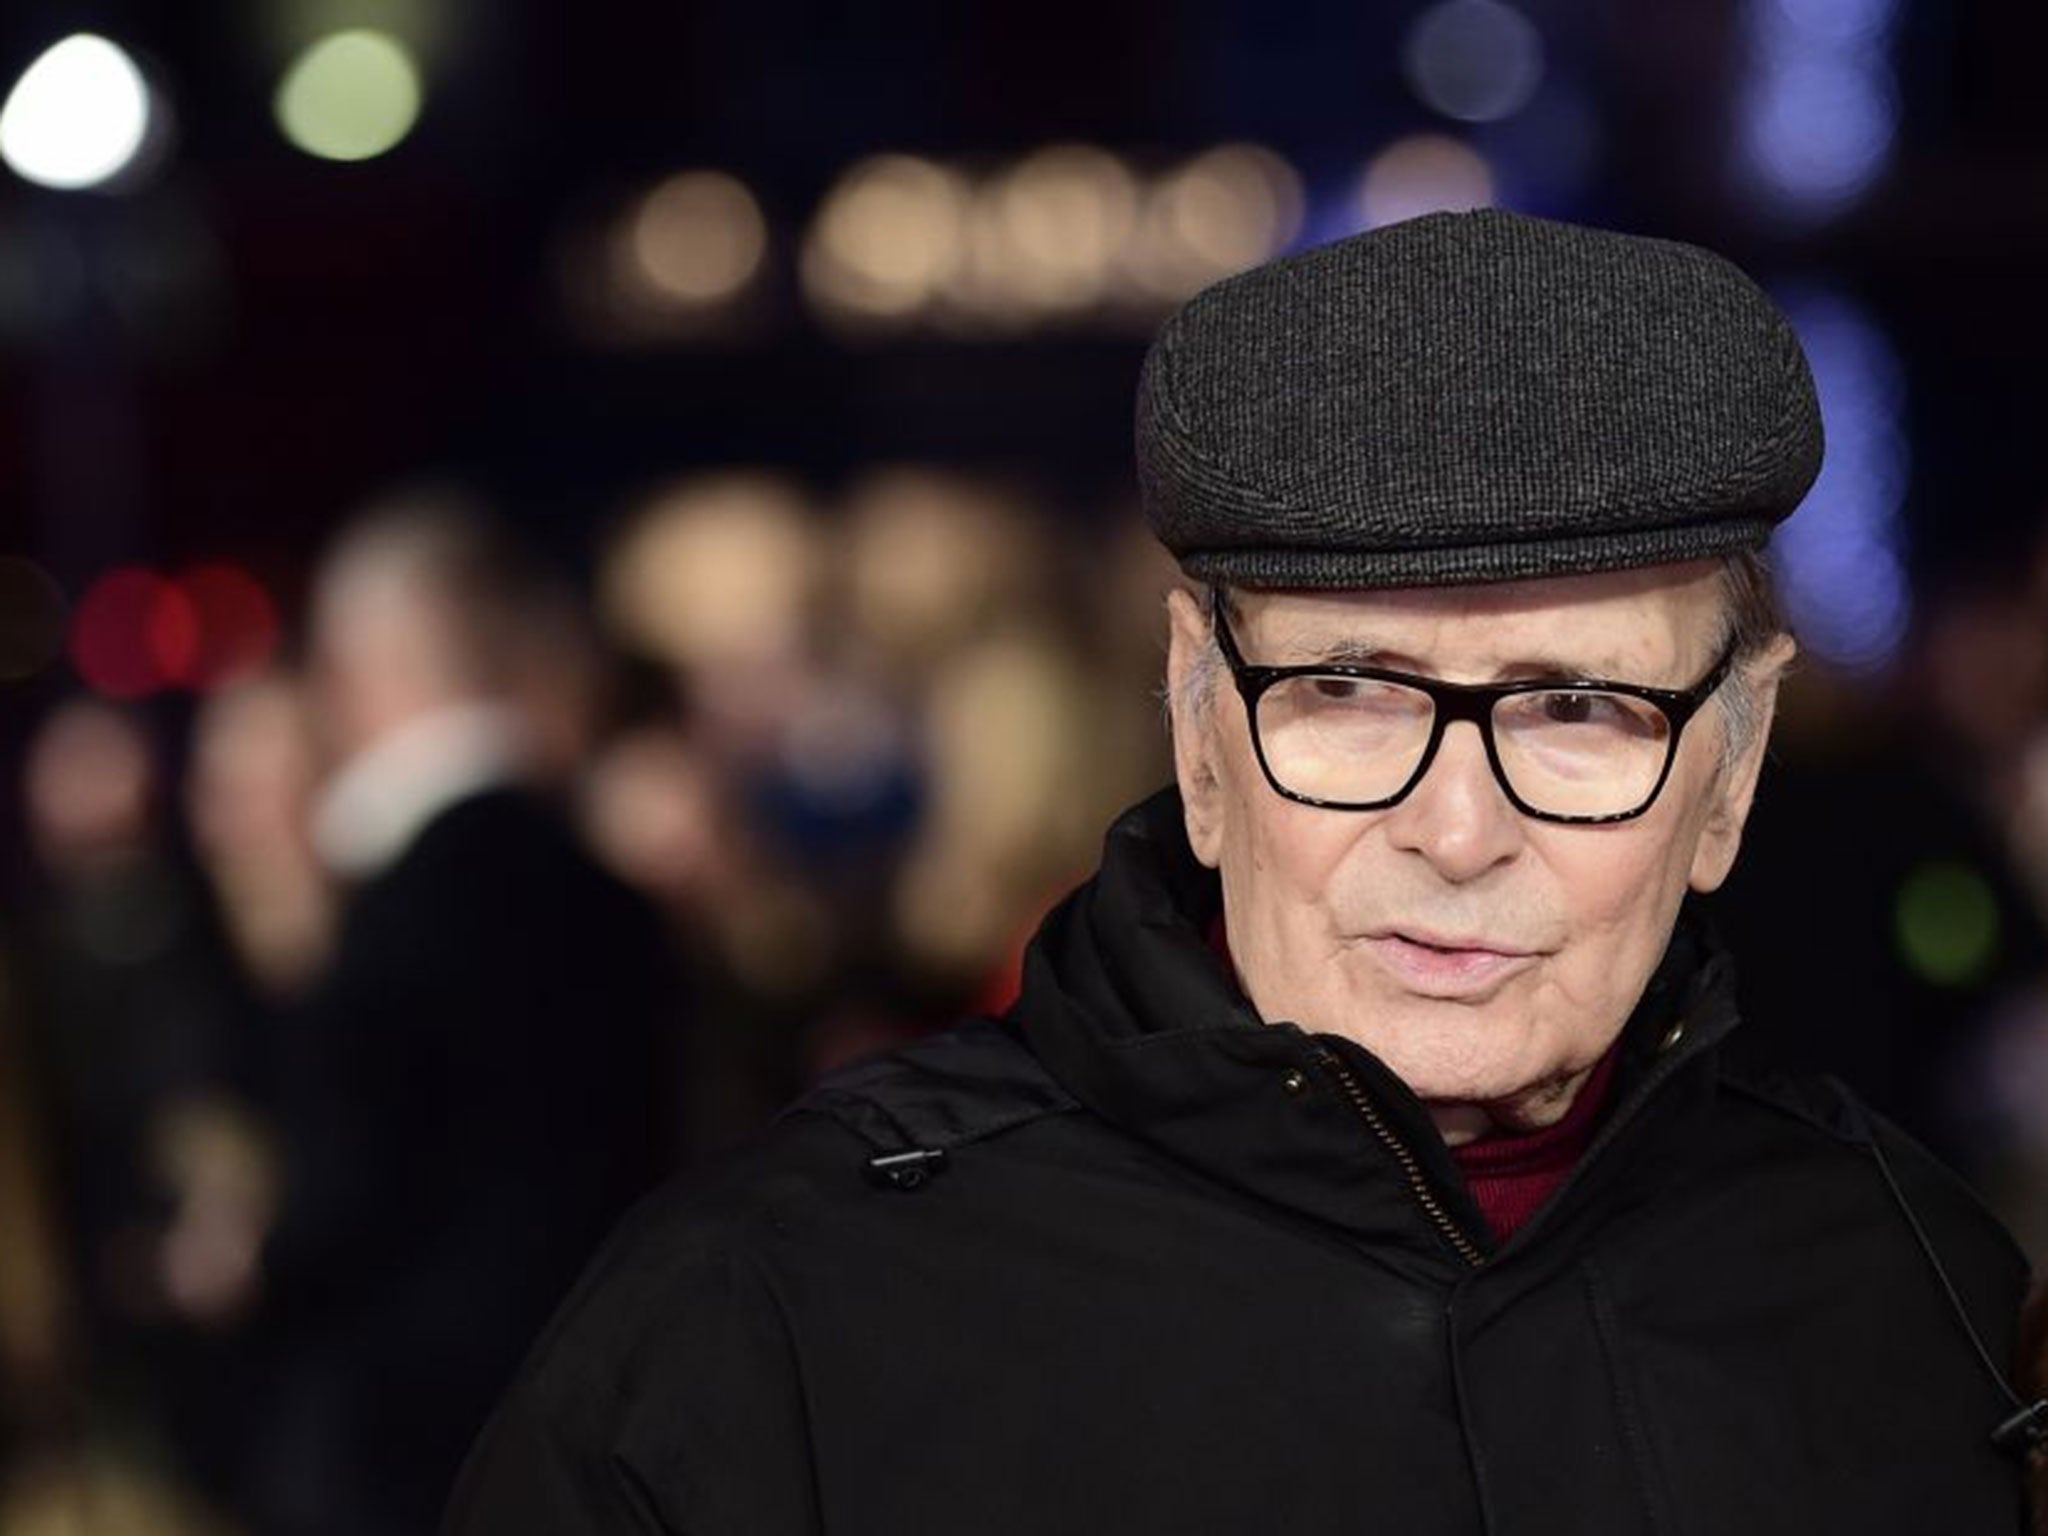 Ennio Morricone was also hailed by the Italian Prime Minister as ‘the pride of Italy’